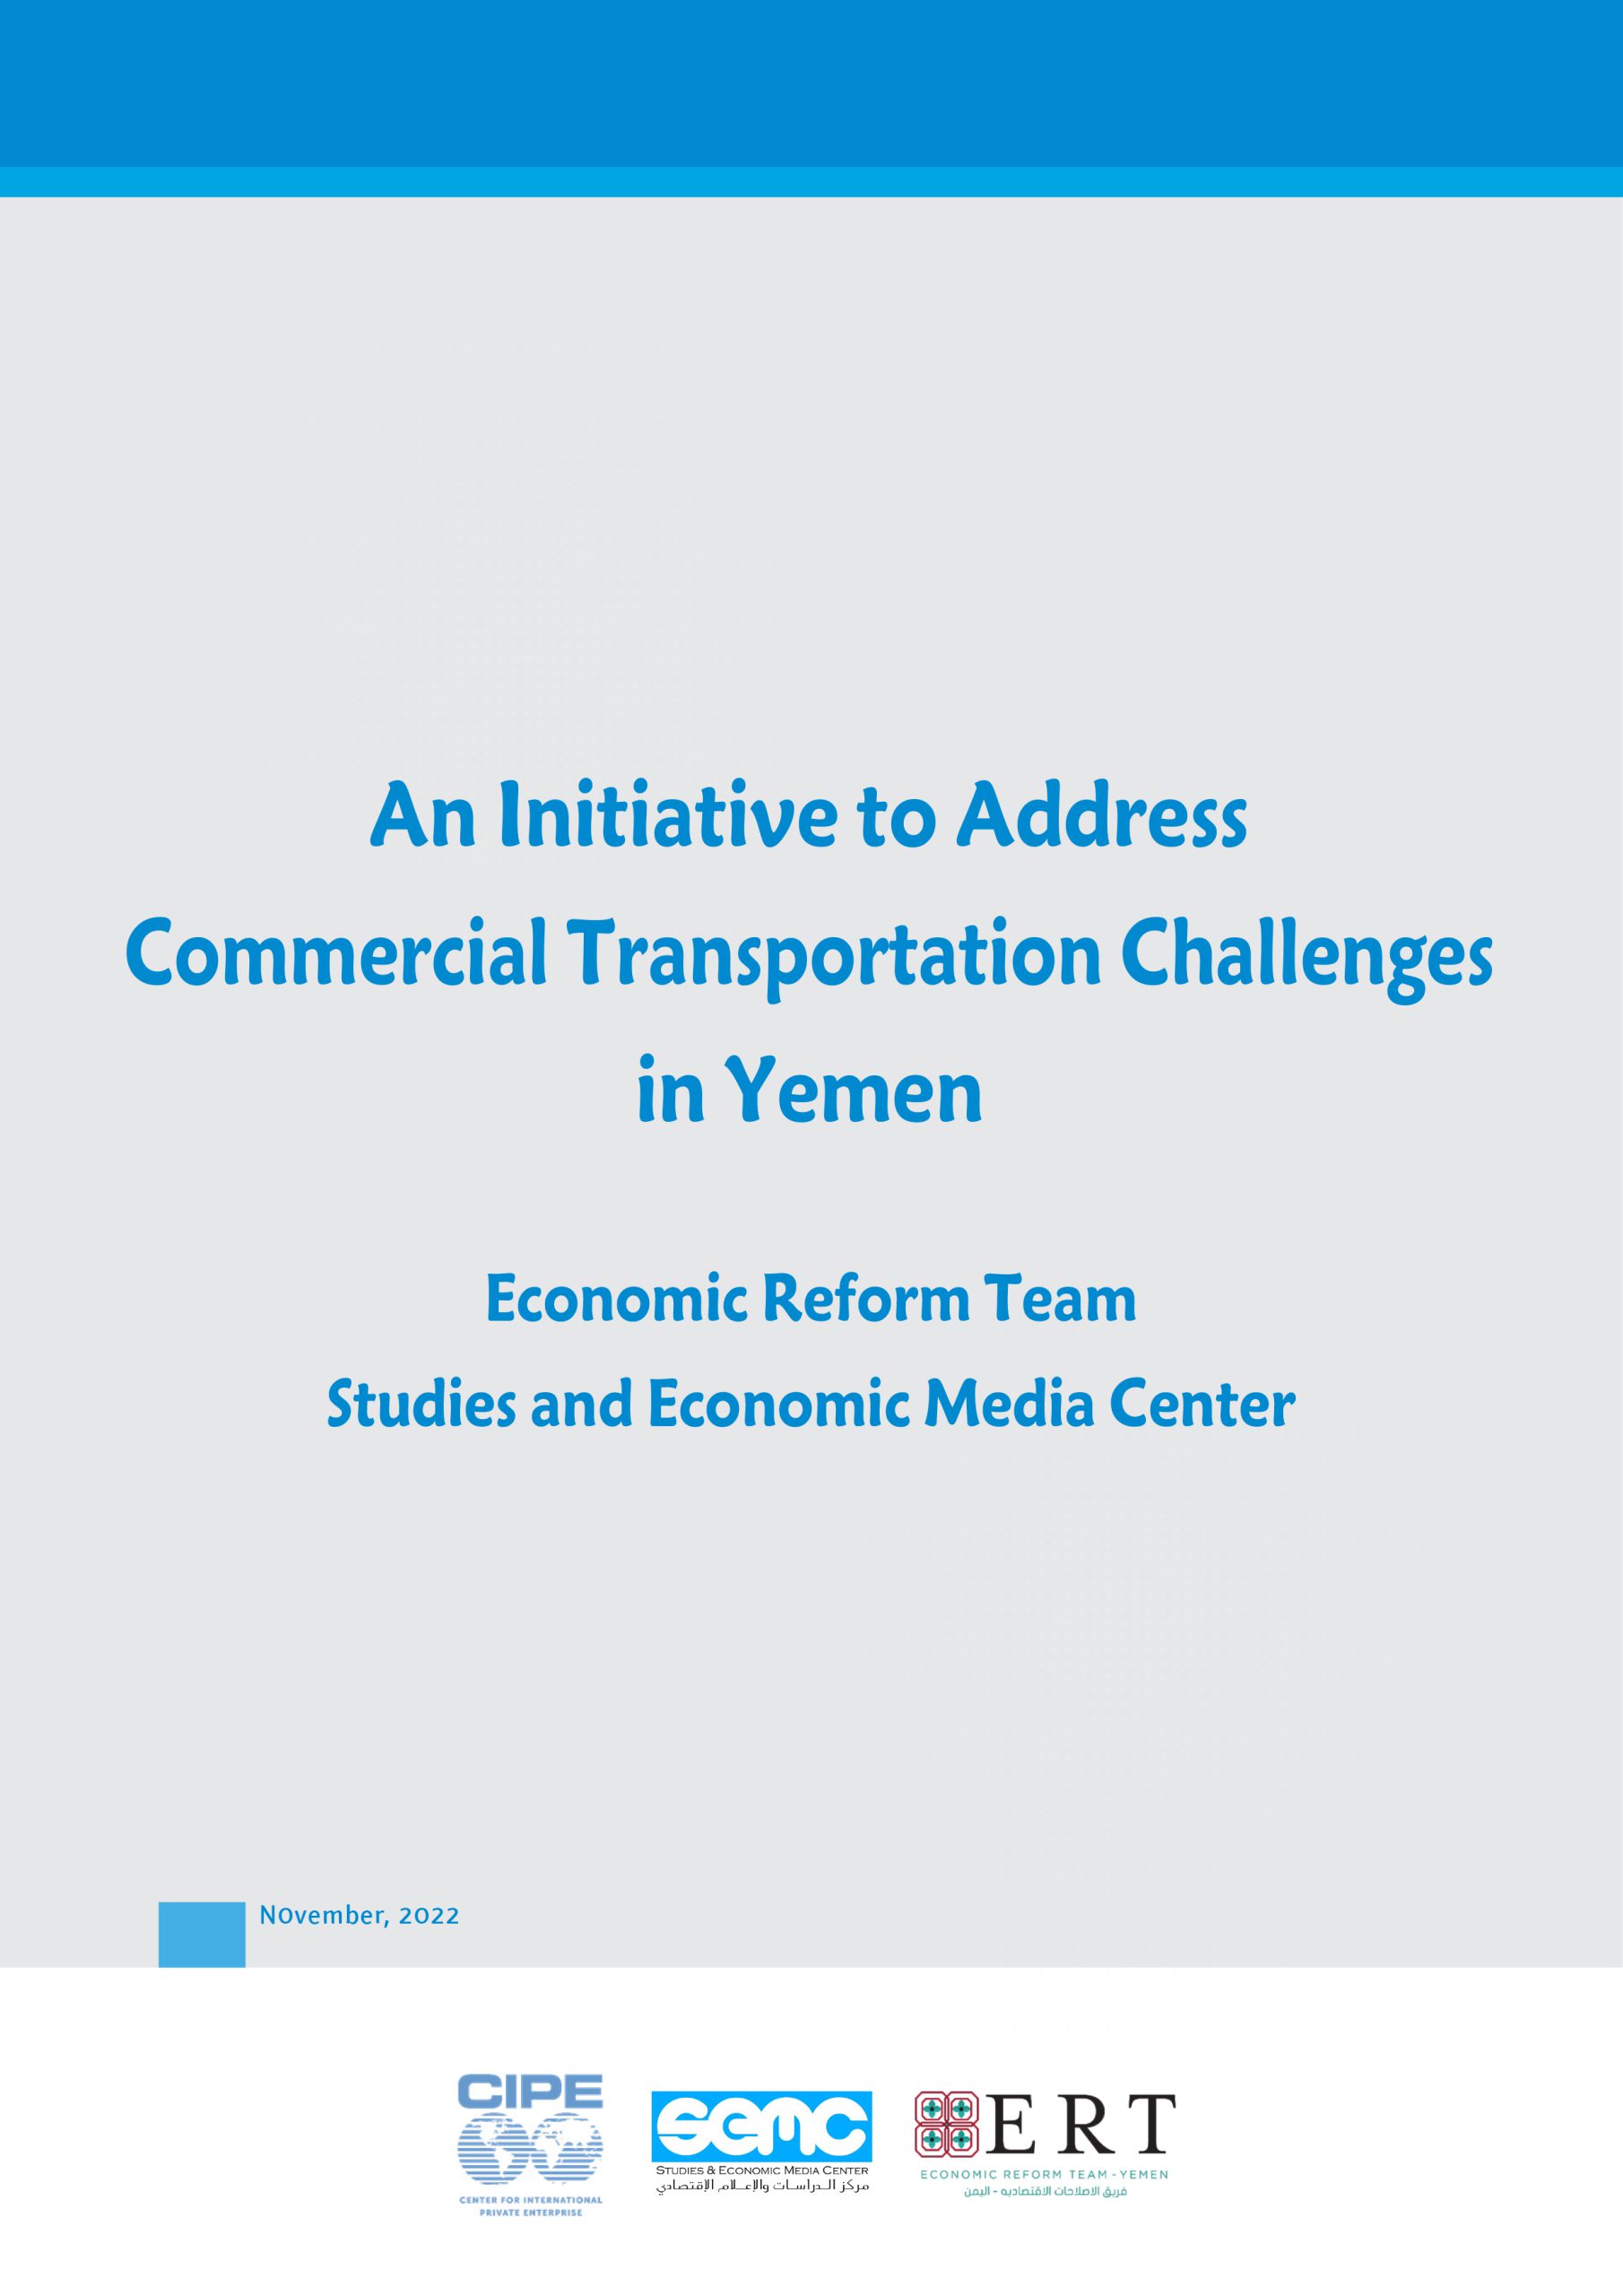 The Private Sector’s Initiative To Address Transportation Challenges In Yemen